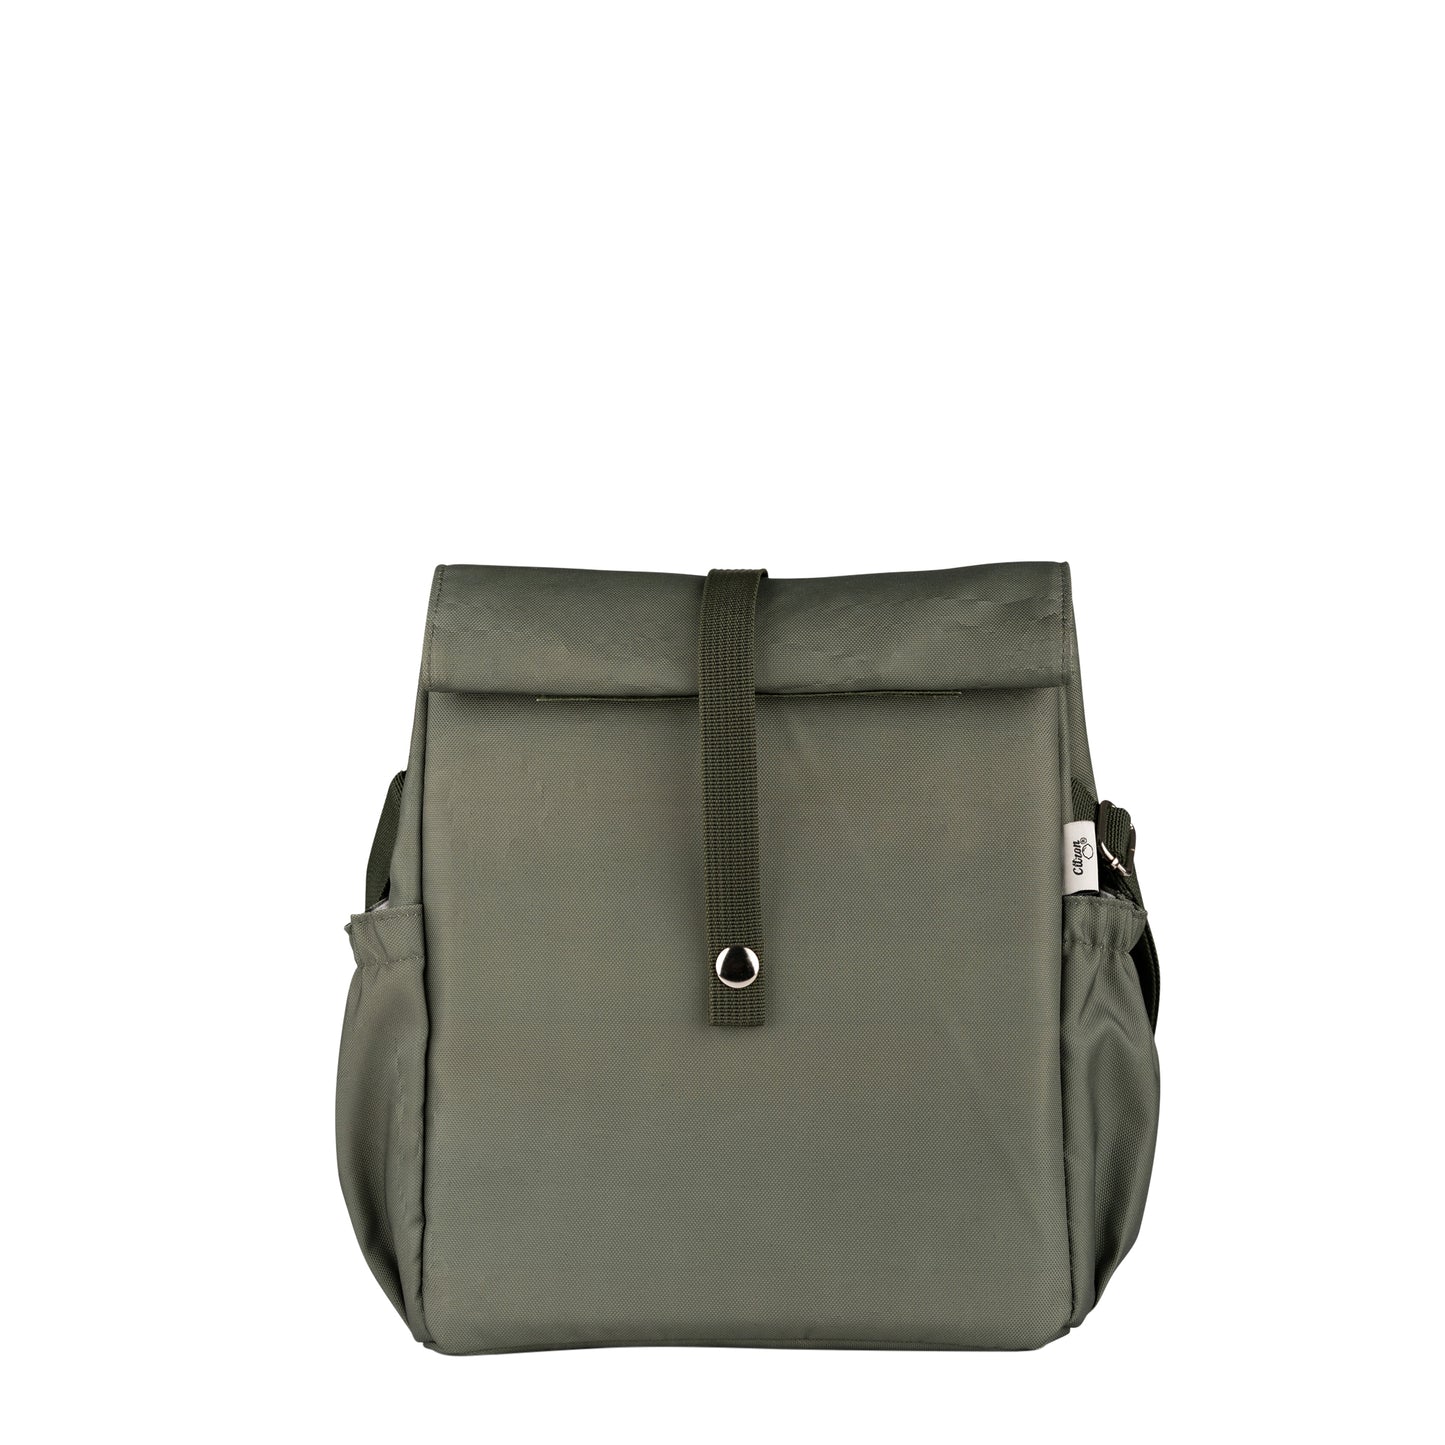 Insulated Rollup Lunchbag - Olive Green